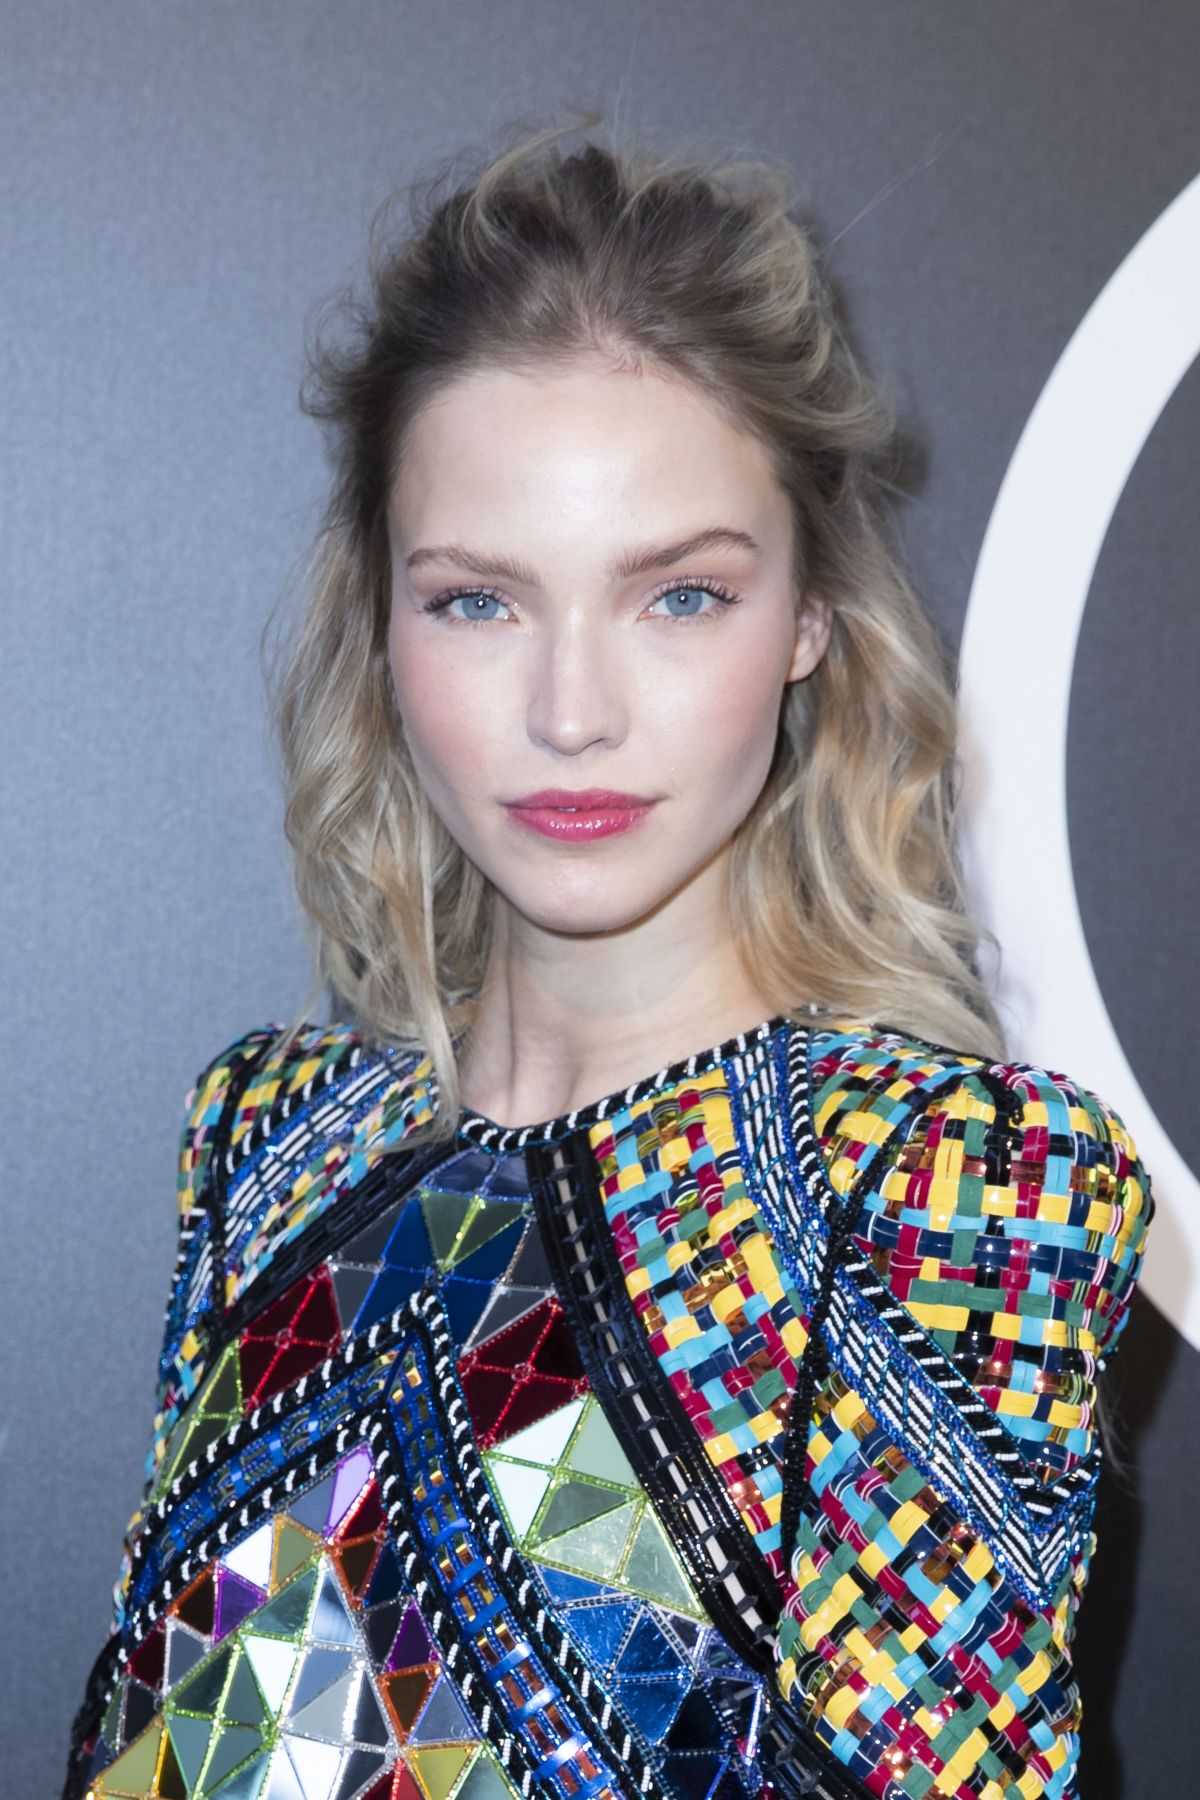 55 Sasha Luss Hot Pictures Are Delight For Fans | Best Of Comic Books